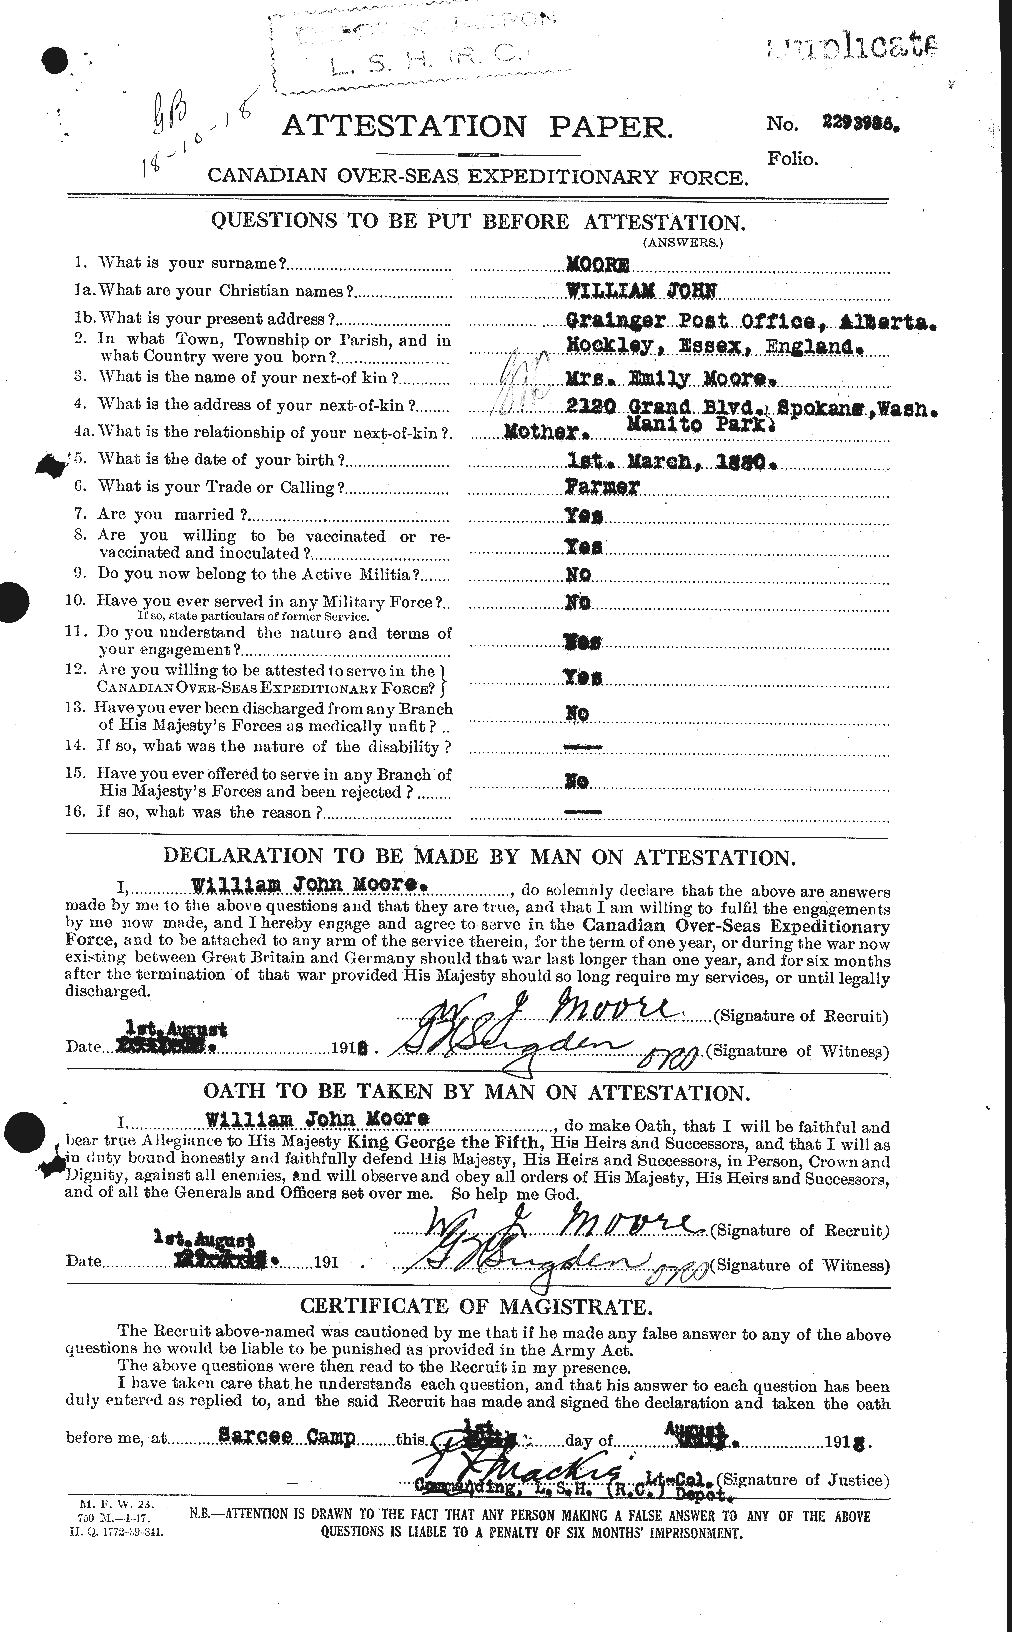 Personnel Records of the First World War - CEF 505847a